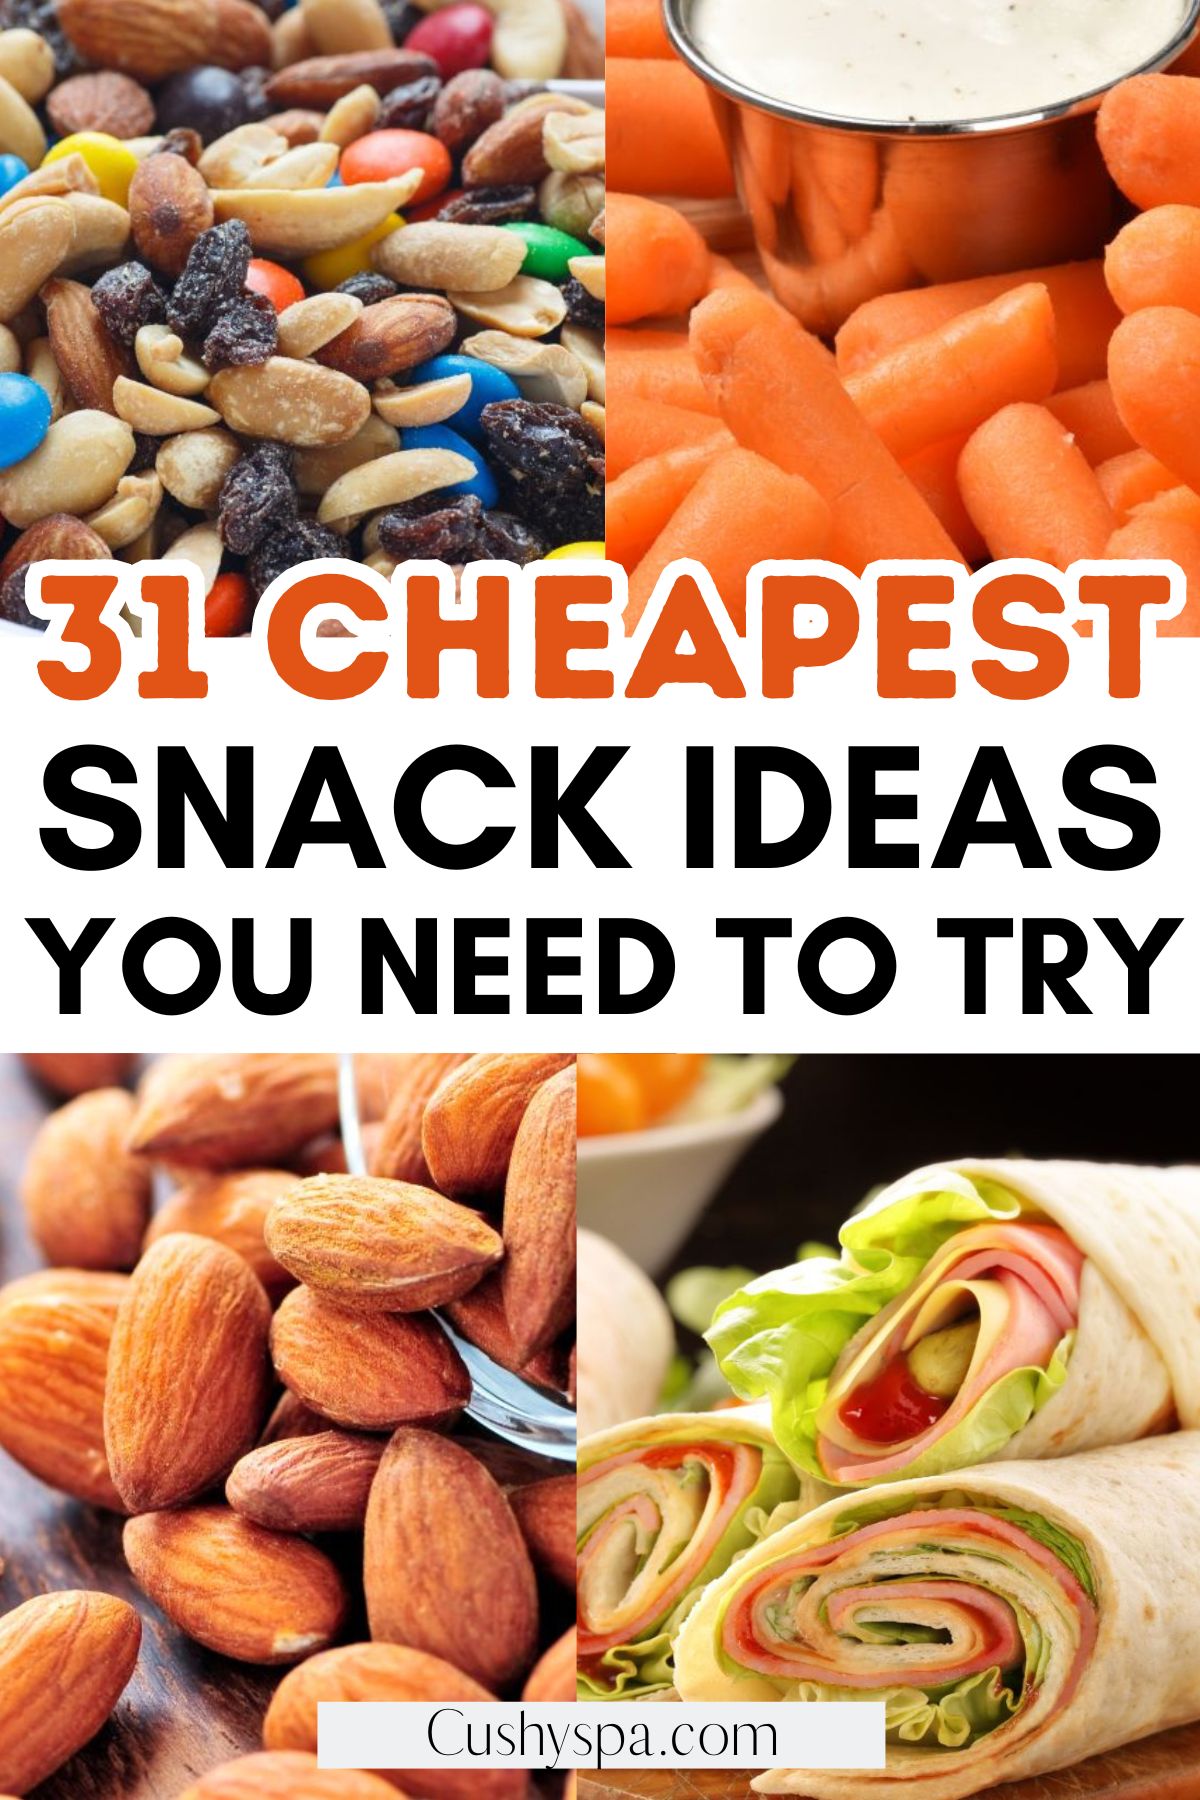 Cheapest Snack Ideas